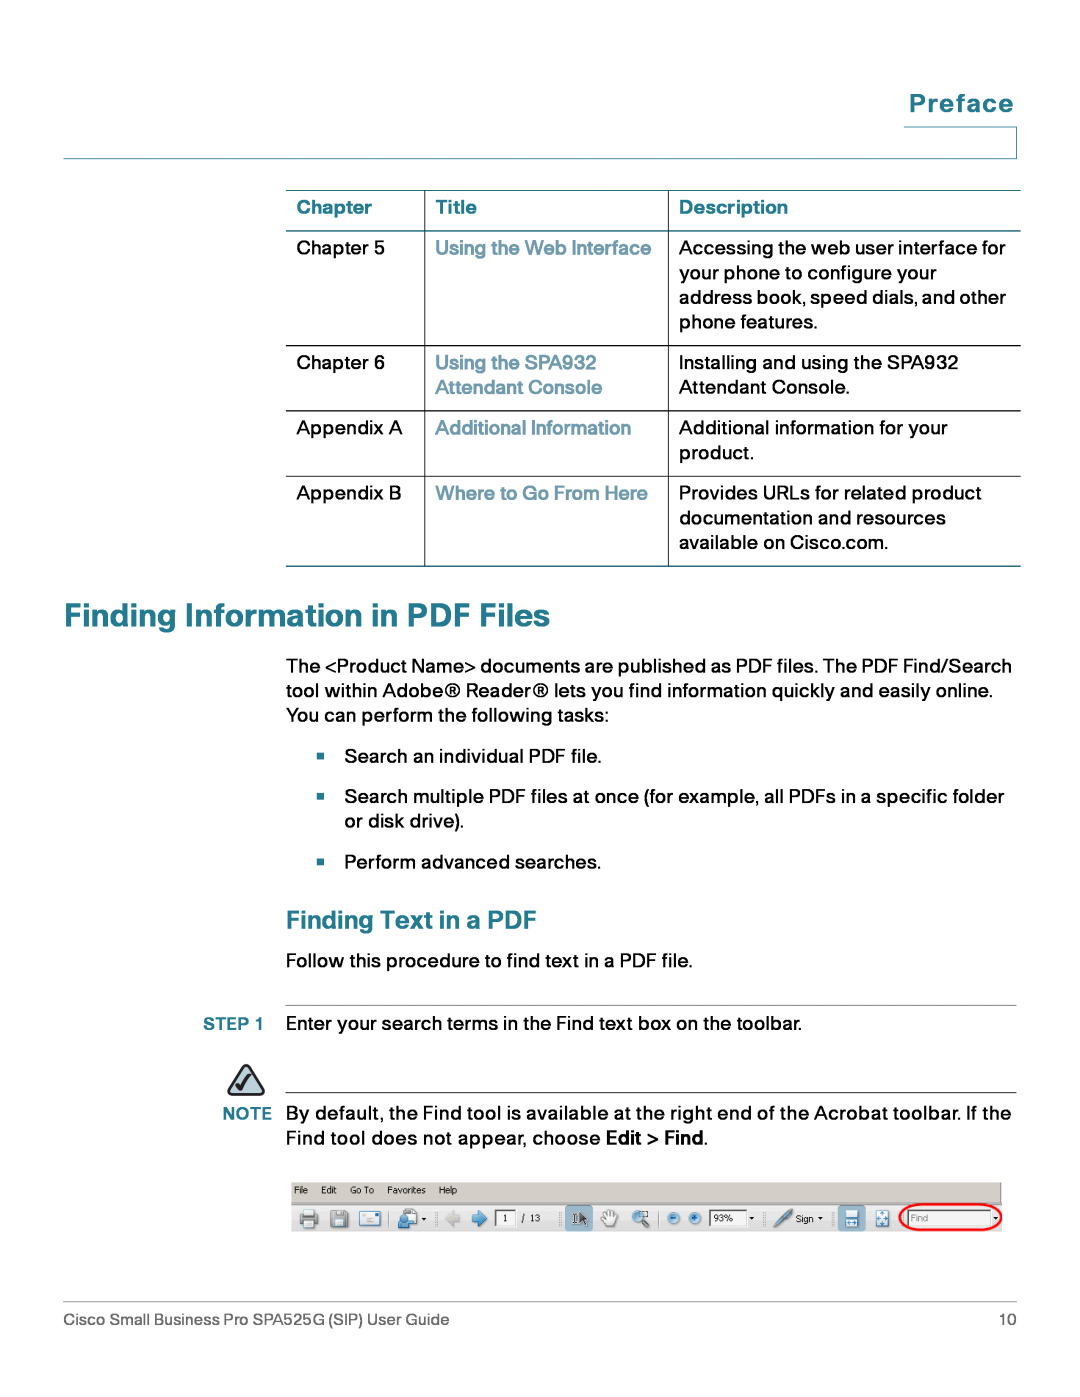 Cisco Systems SPA525G manual Finding Information in PDF Files, Finding Text in a PDF, Preface, Chapter, Title, Description 